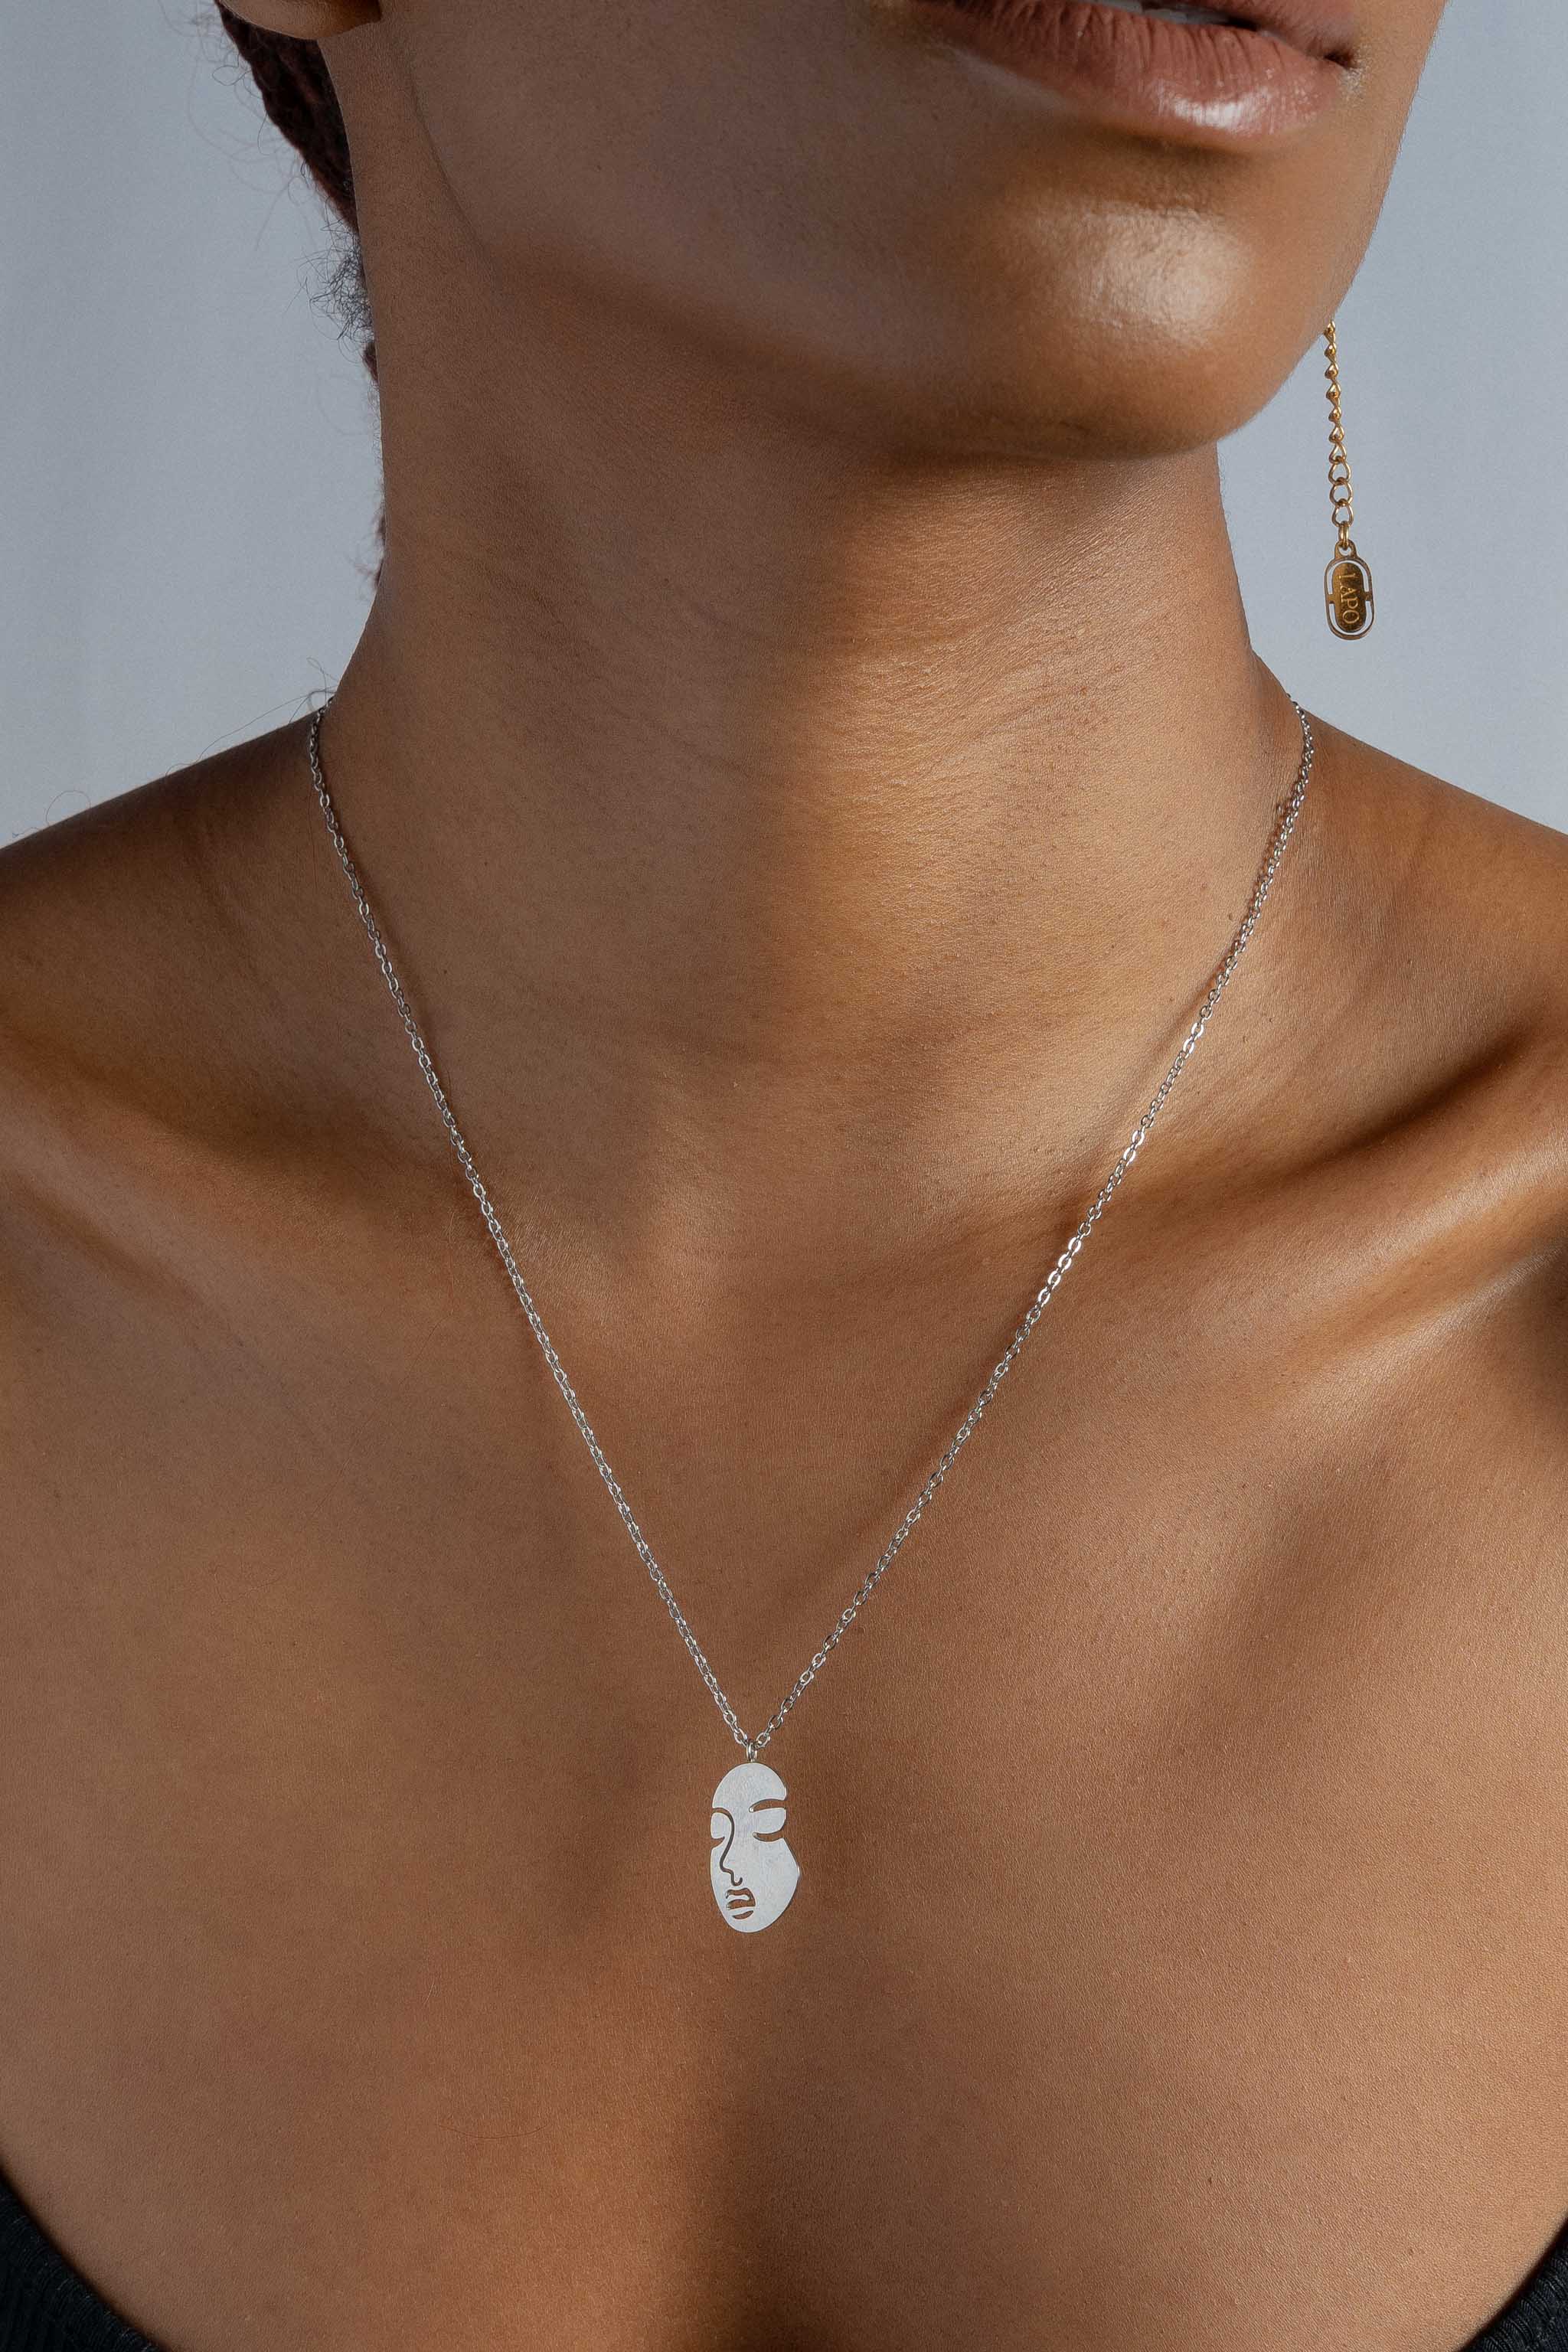 Serenity Necklace with Simple Chain - Silver